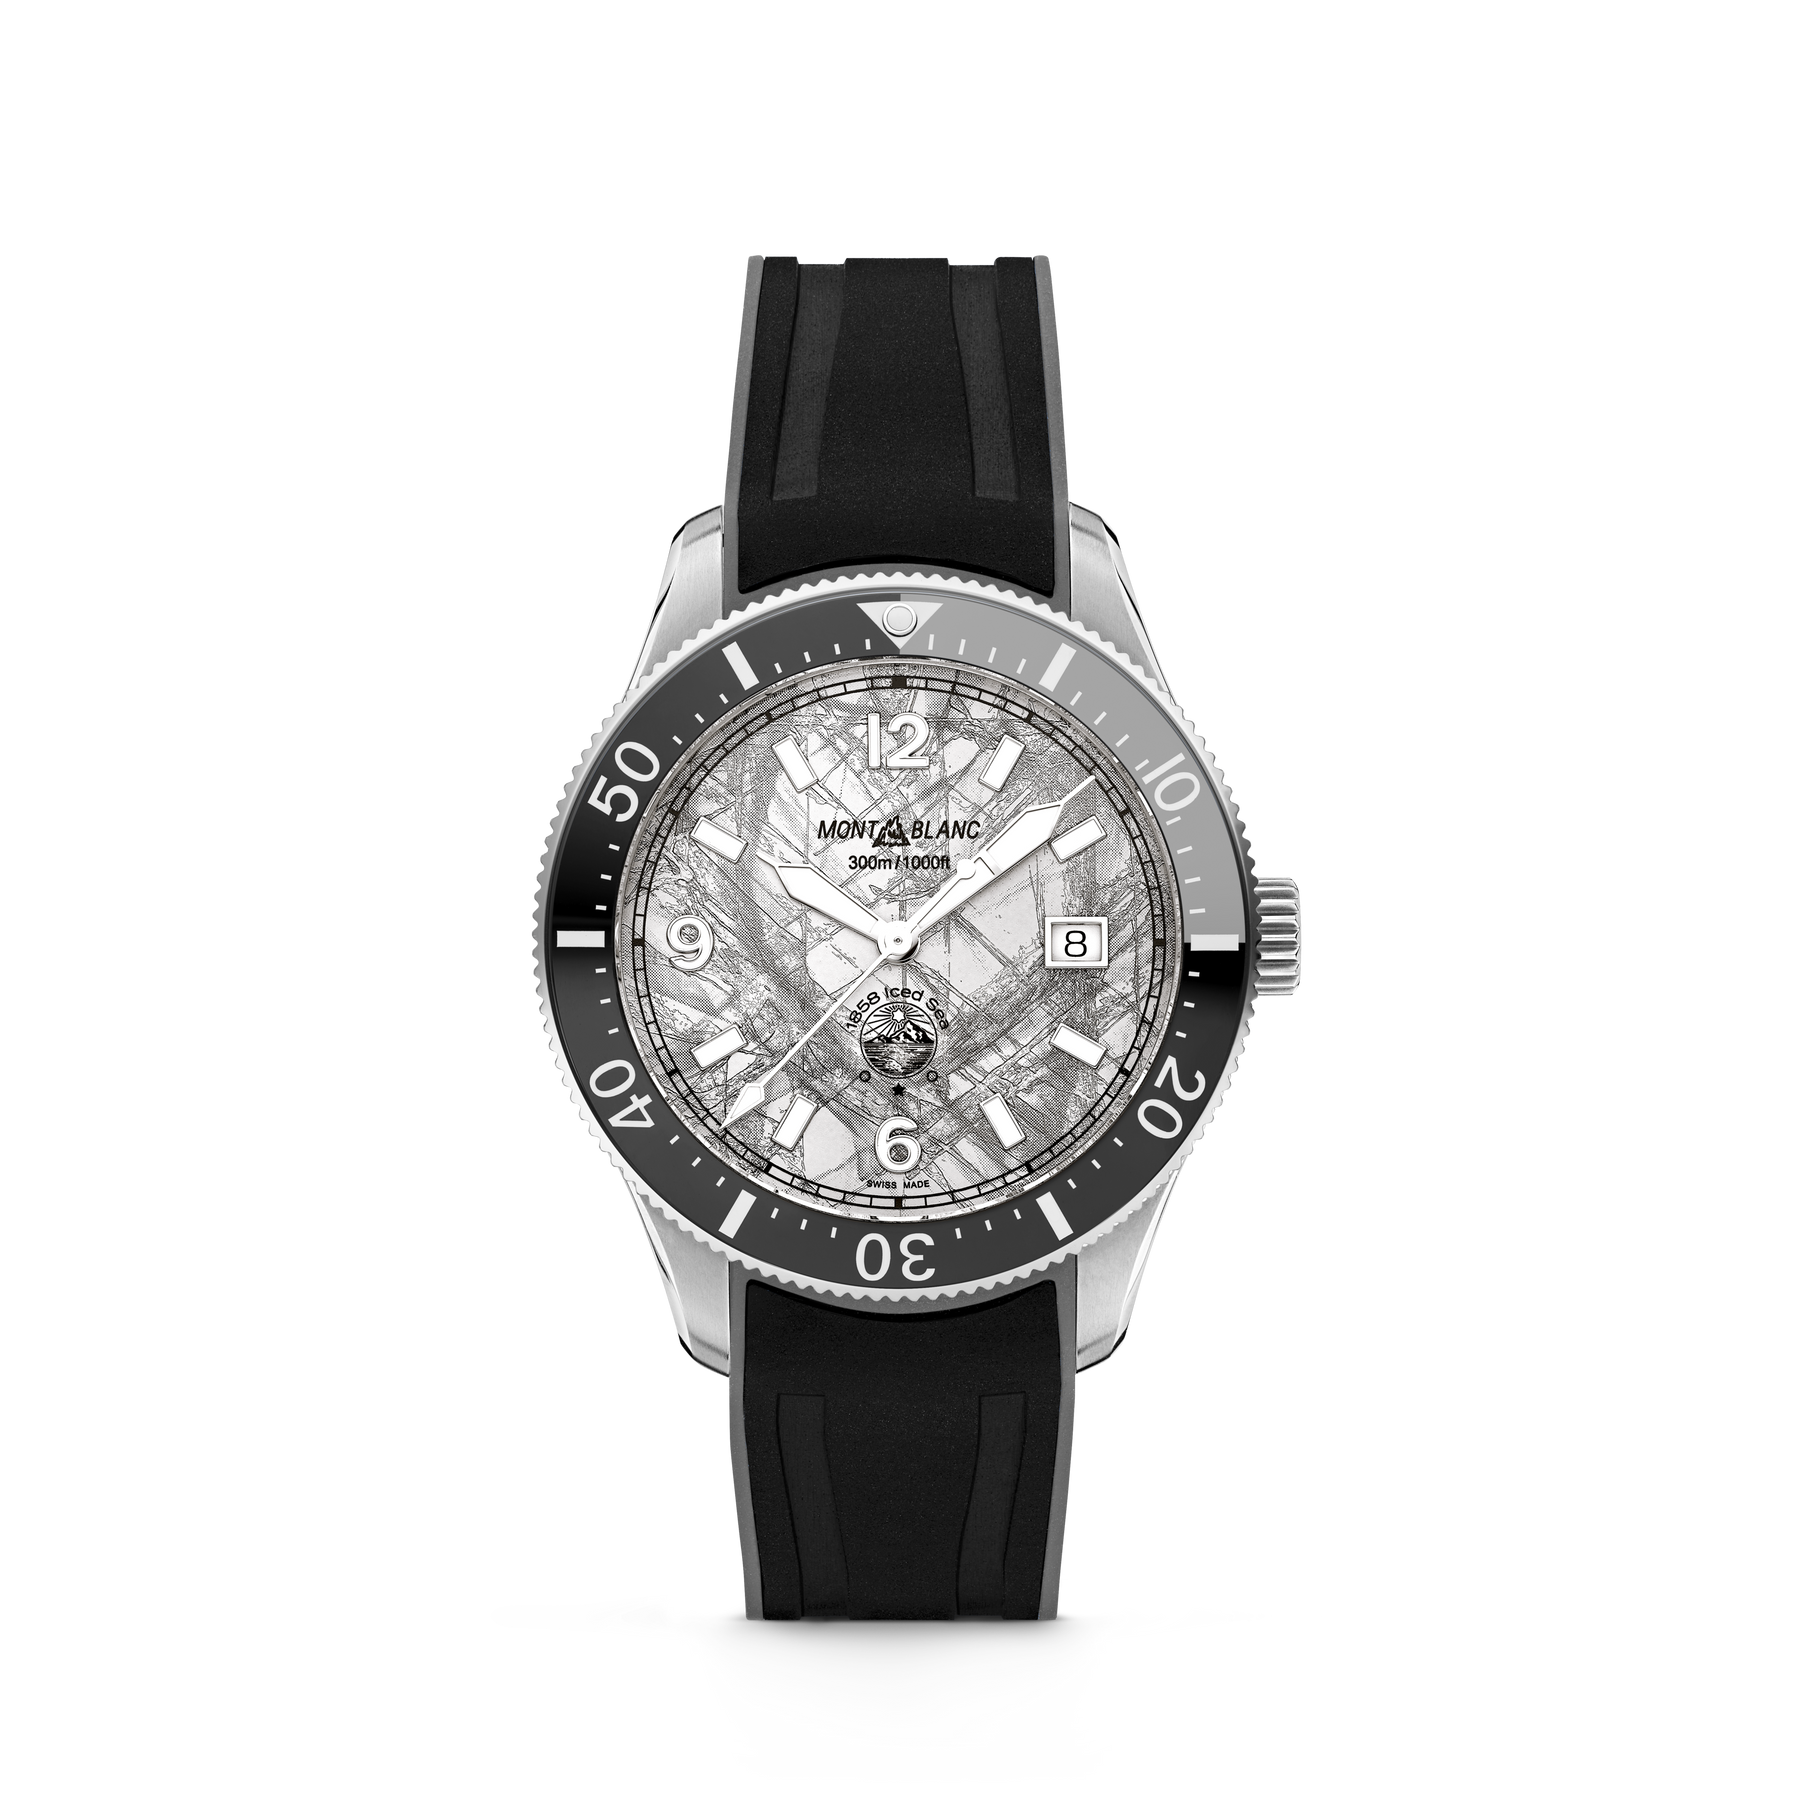 Montblanc 1858 Iced Sea Automatic Date